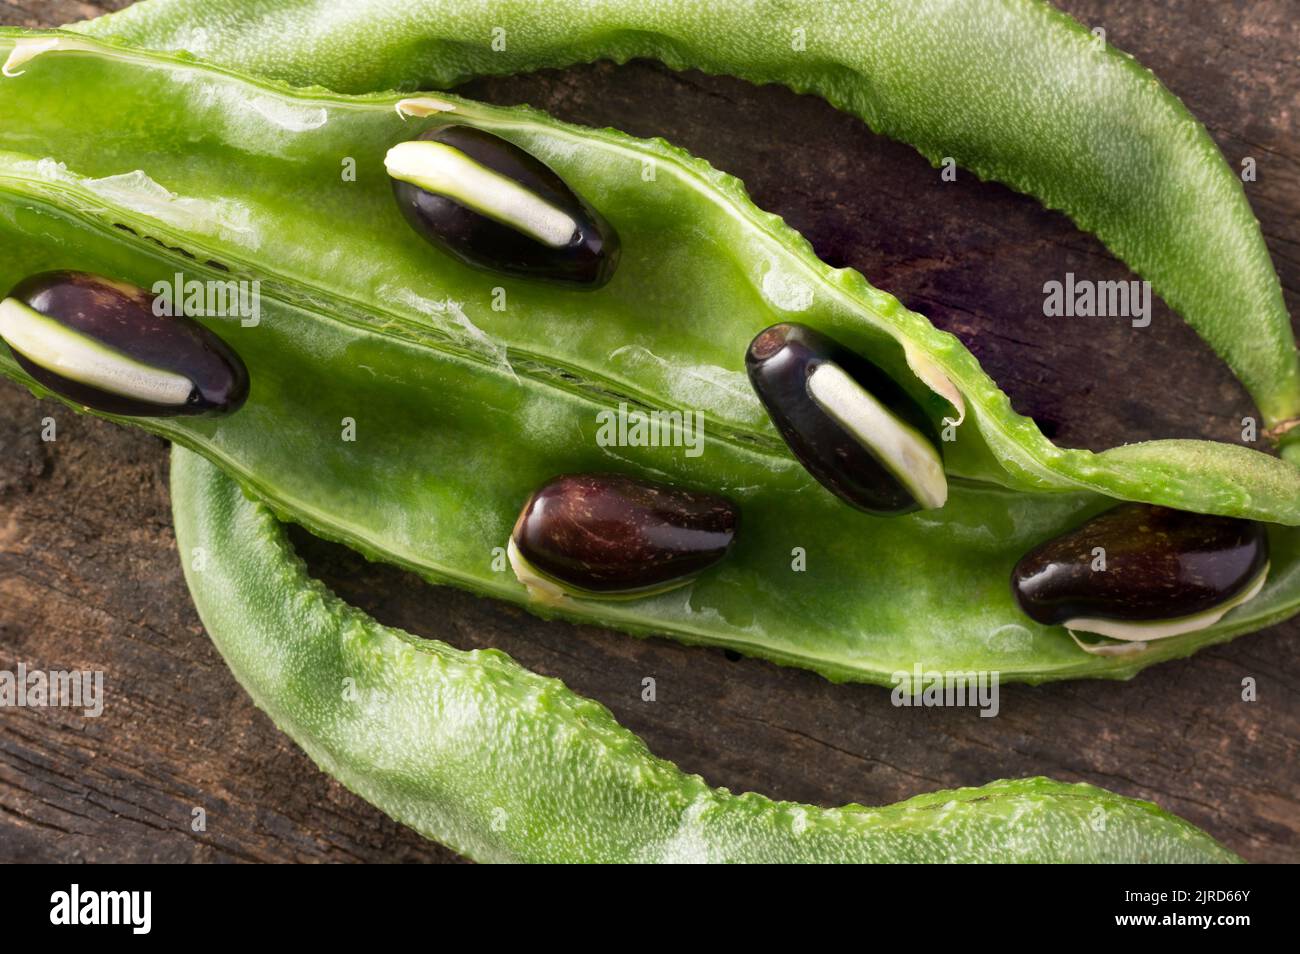 close-up macro view of hyacinth bean pods with seeds, lablab purpureus, also known as valor papdi beans, edible indian vegetable on wooden surface Stock Photo